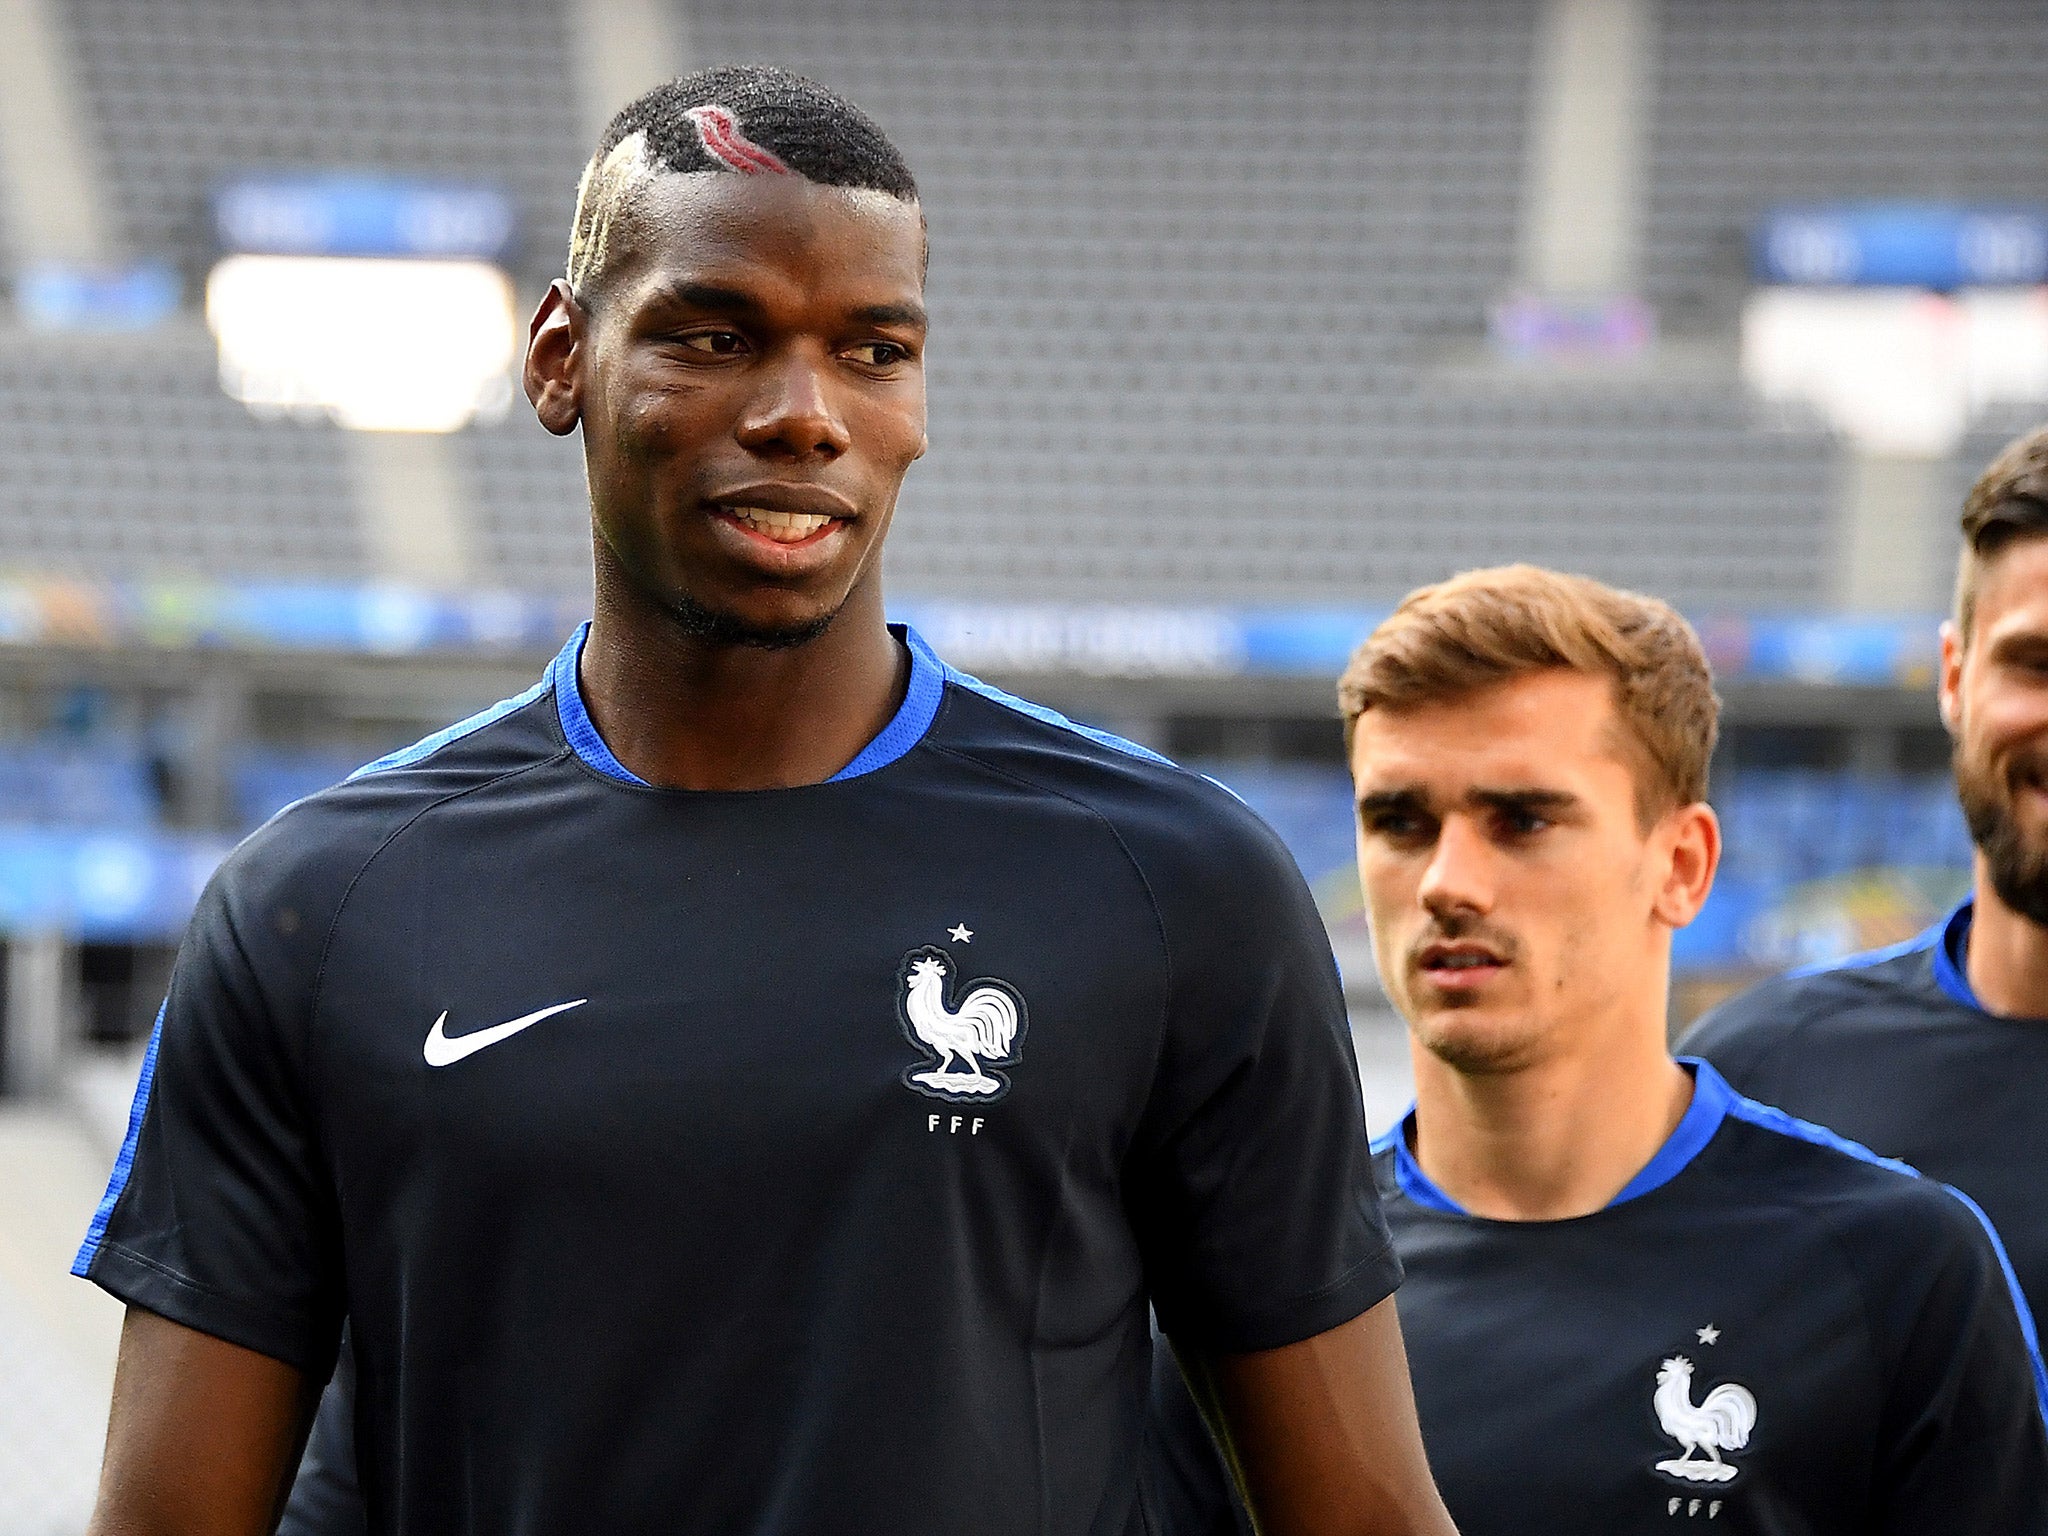 Pogba has become one of the most highly-sought players in Europe